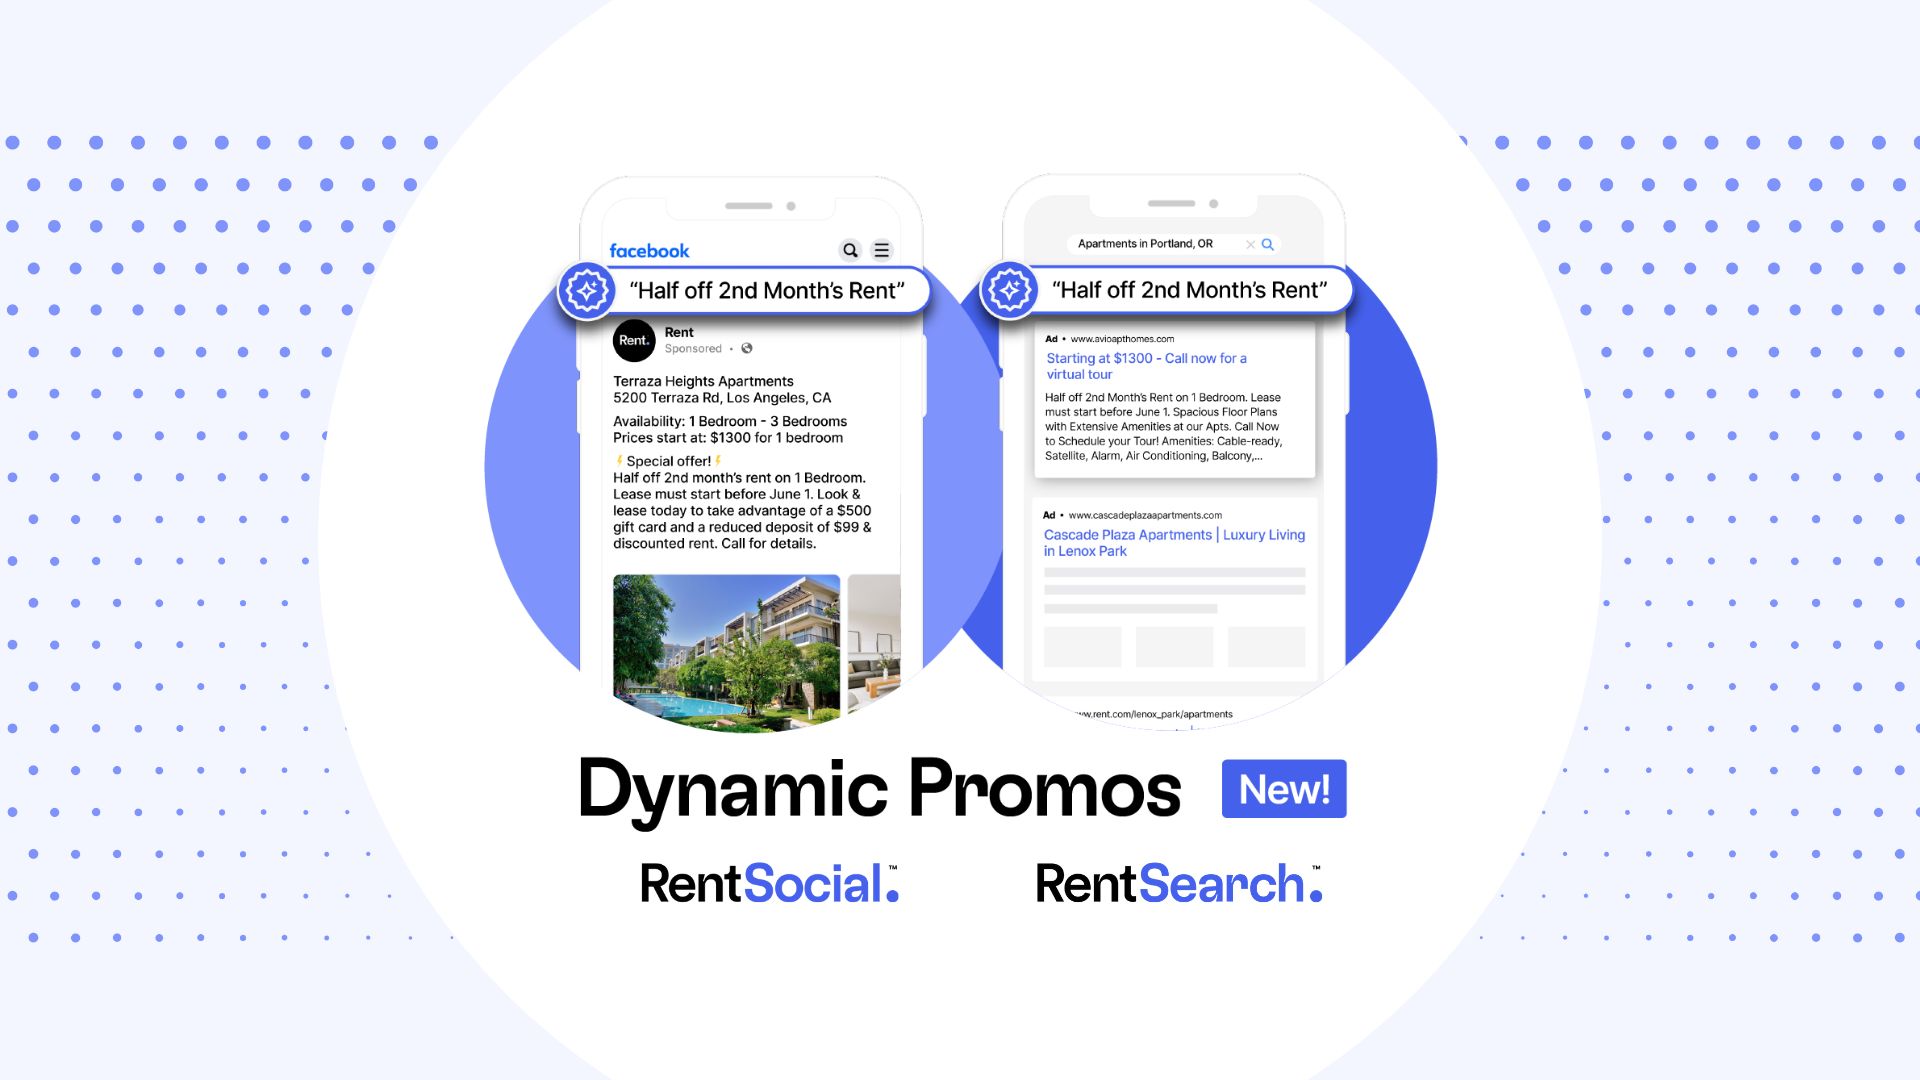 New Dynamic Promos capture renter interest on Google and Facebook with ease